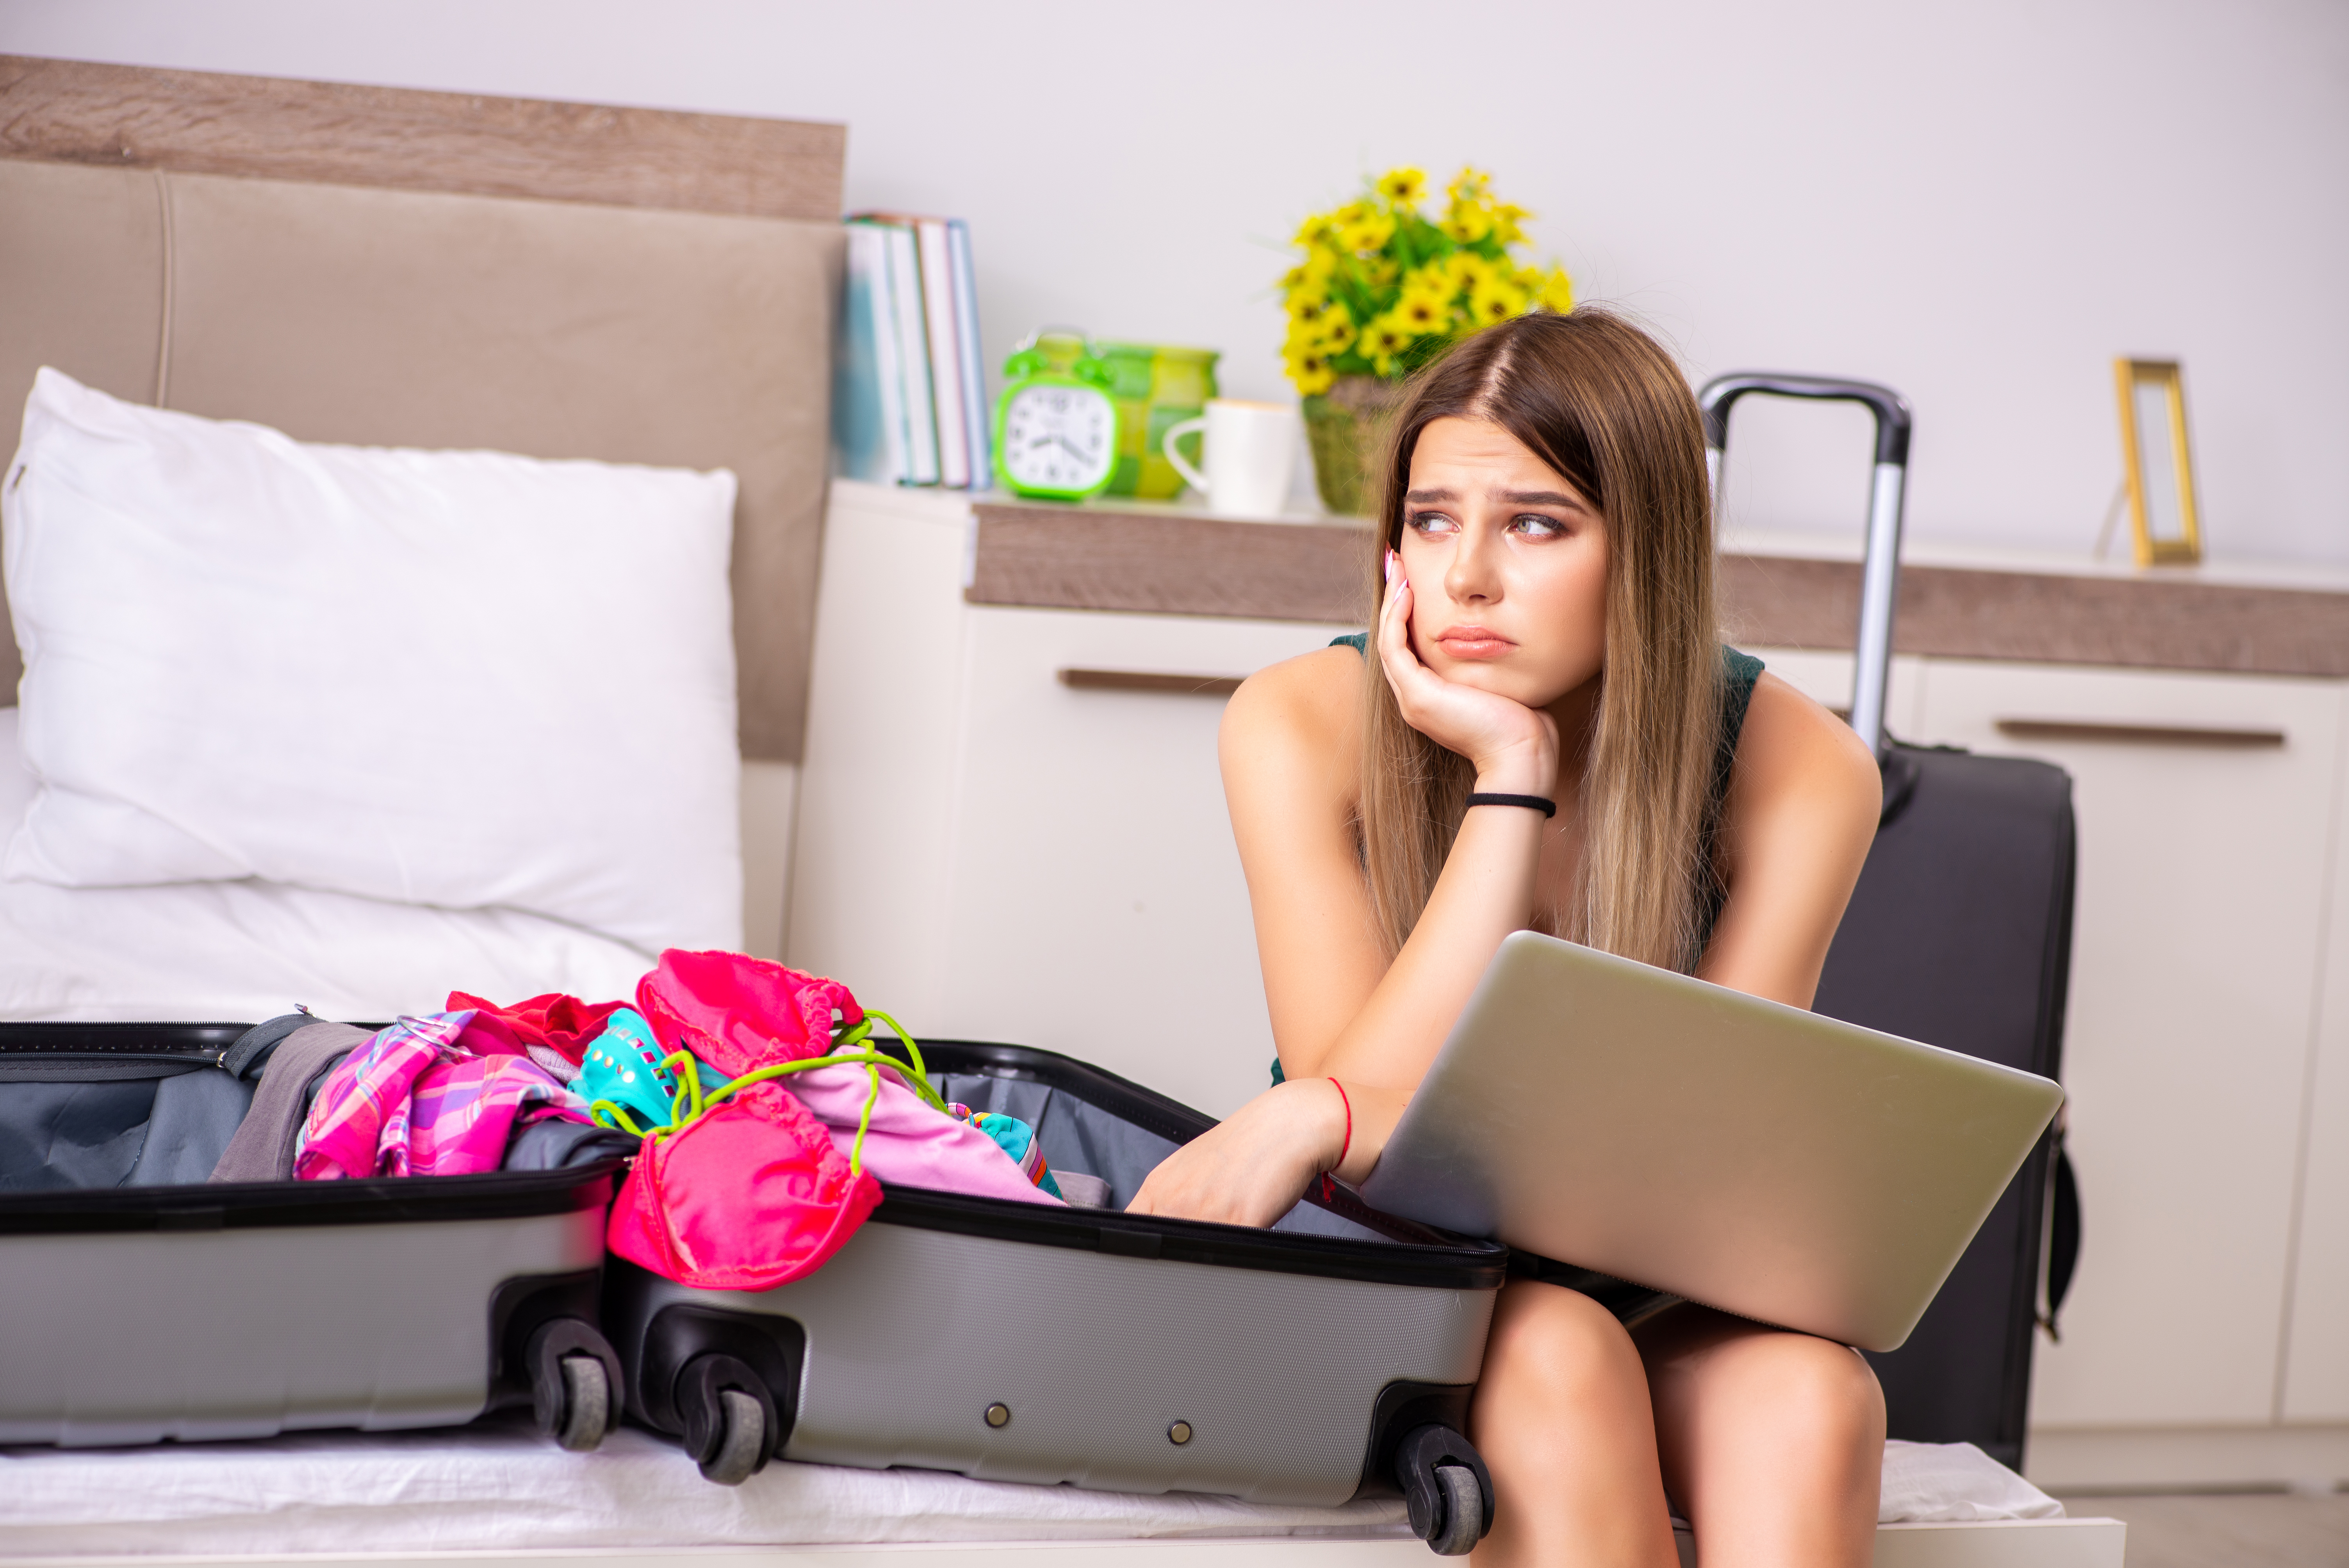 Upset young girl sitting next to a packed suitcase | Source: Shutterstock